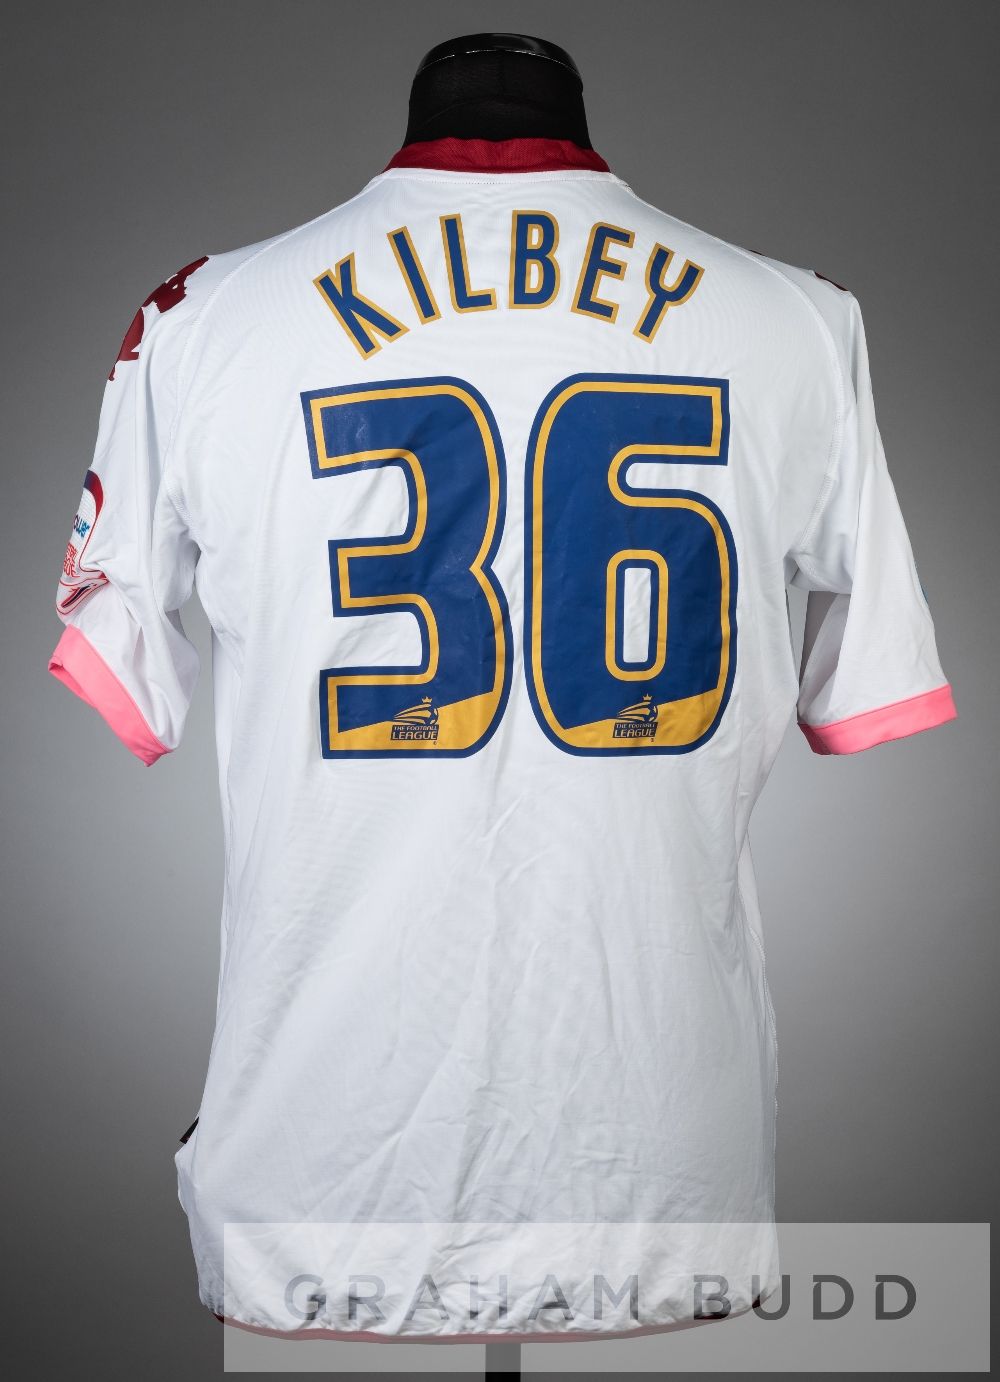 Tom Kilbey white and claret Portsmouth no.36 away jersey, season 2010-11, short-sleeved with - Image 2 of 2